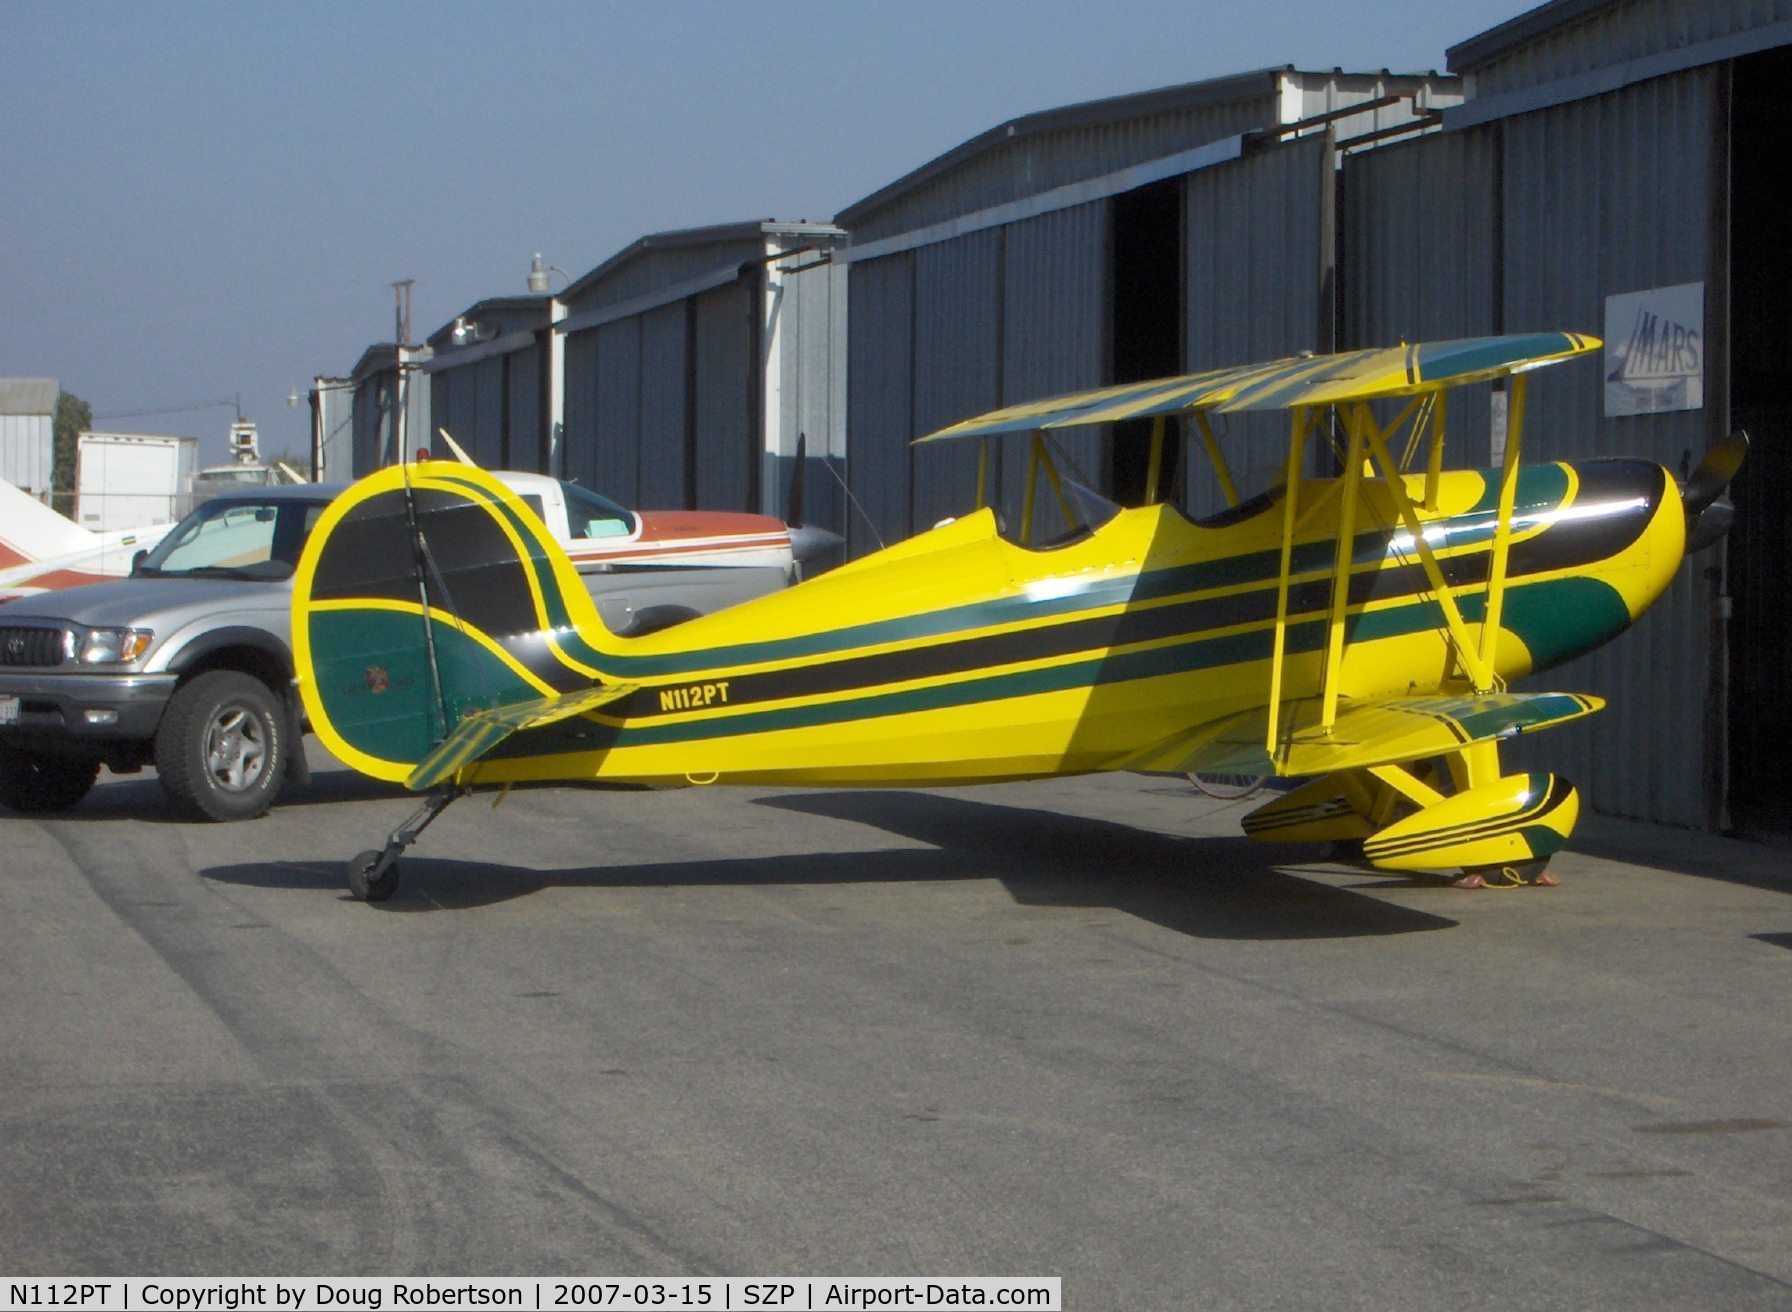 N112PT, 1978 Great Lakes 2T-1A-2 Sport Trainer C/N 0808, 1978 Great Lakes 2T-1A-2, Lycoming IO-360-B1F6 180 Hp, 4 aileron model, inverted fuel & oil systems, CS prop, production aerobatic aircraft